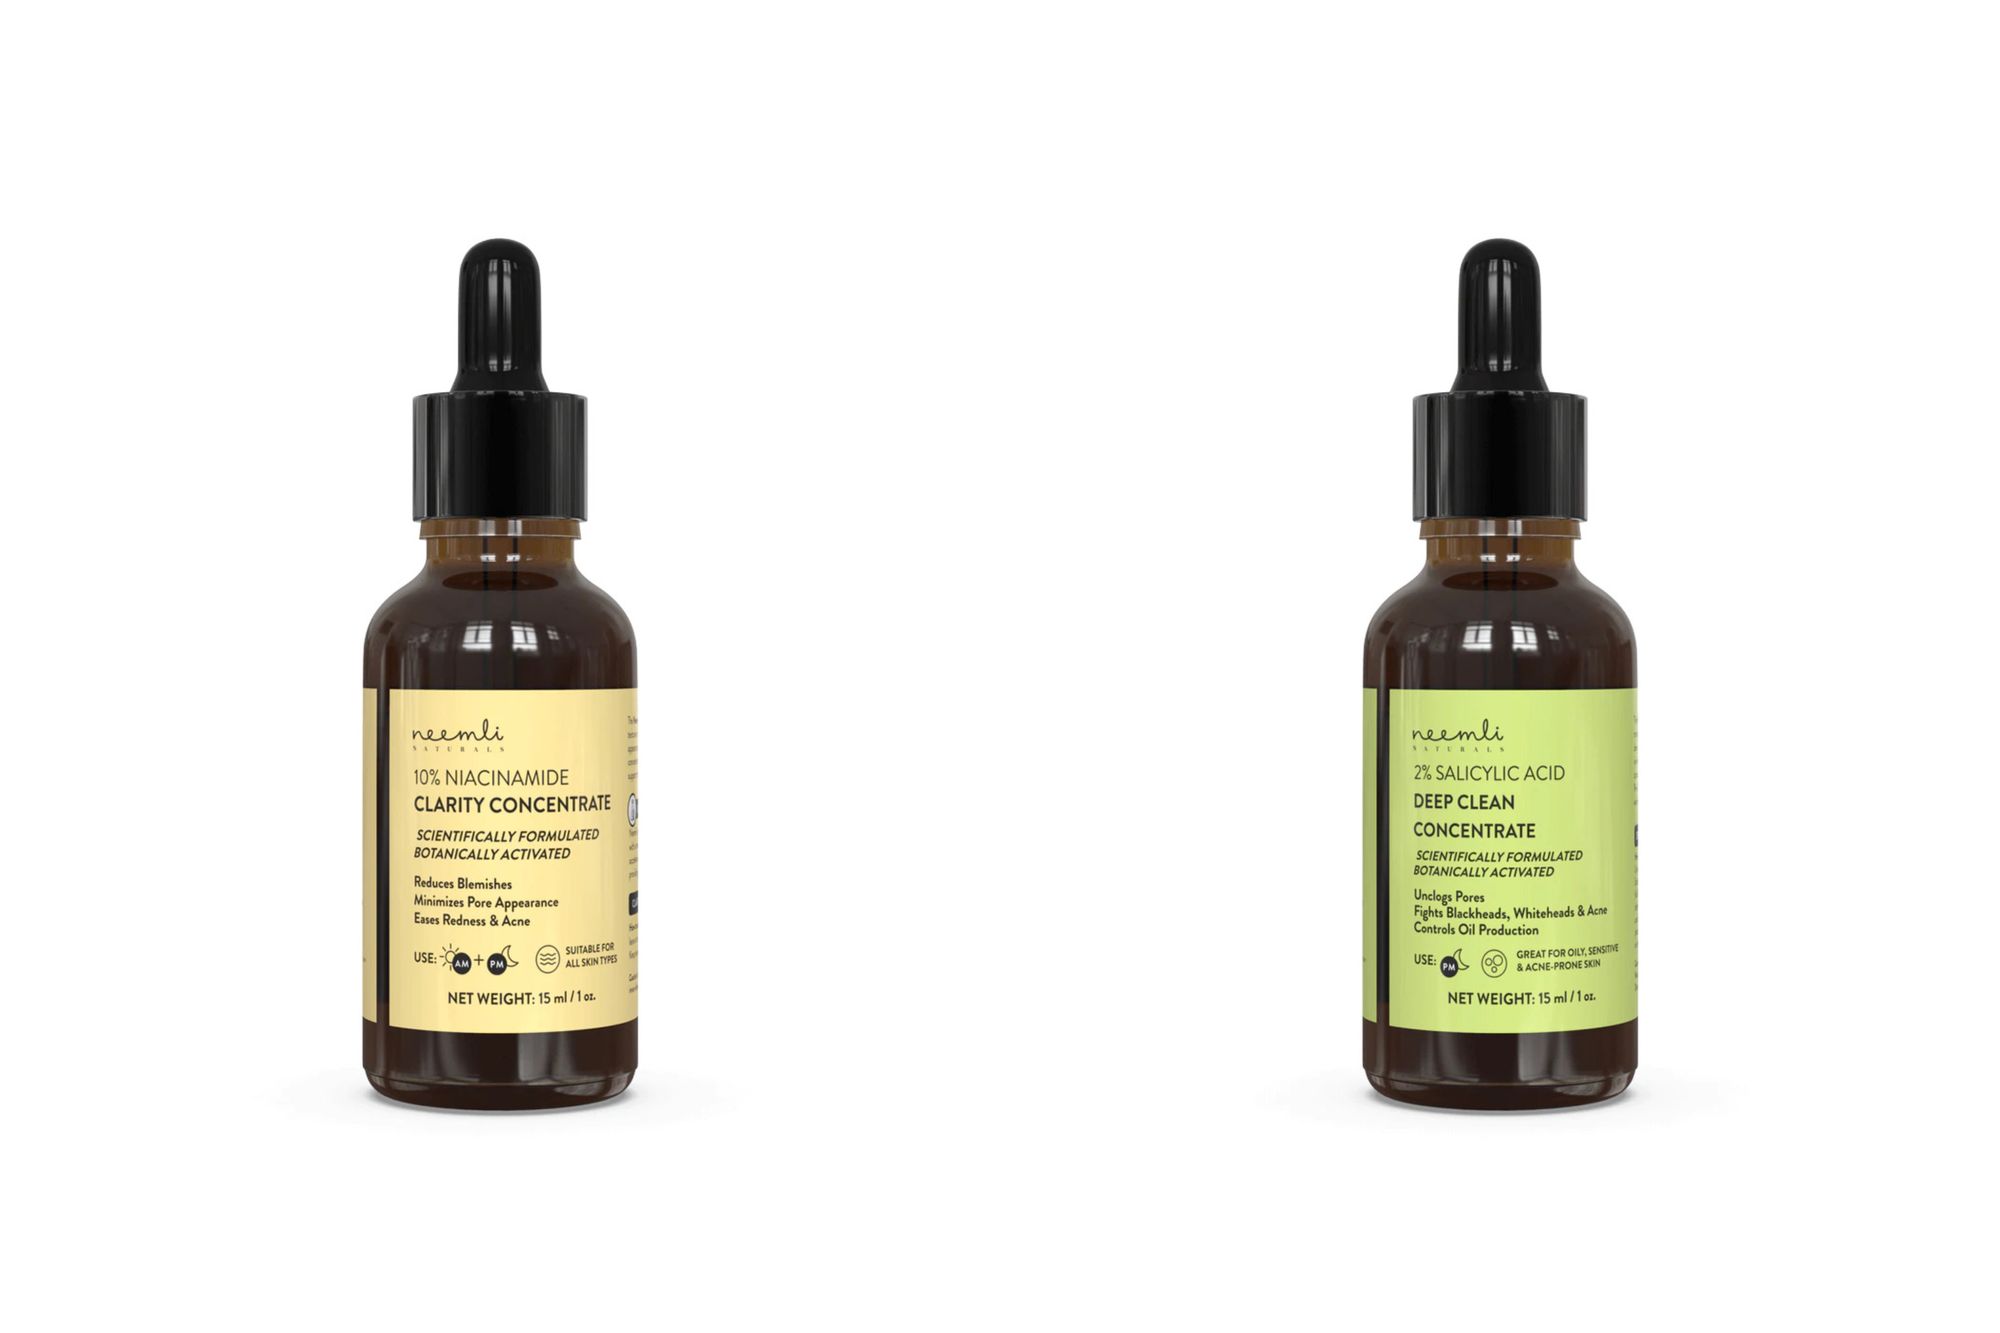 Neemli Naturals, 10% Niacinamide Clarity Concentrate and 2% Salicylic Acid Deep Clean Concentrate(Source: www.neemlinaturals.com)